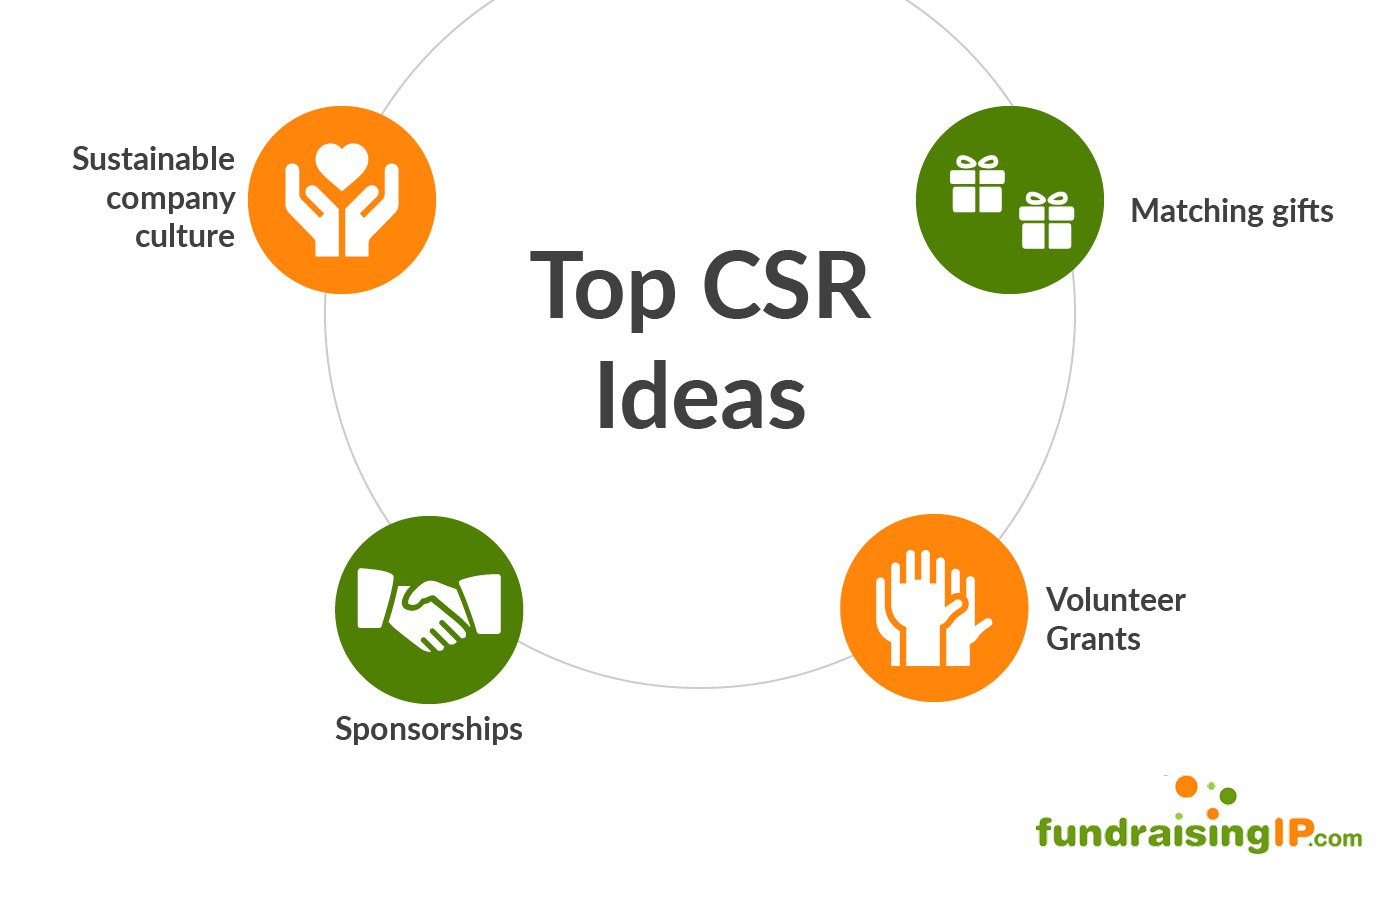 The top four corporate social responsibility ideas for companies are shown: matching gifts, sponsorships, volunteer grants, and sustainable company culture. 